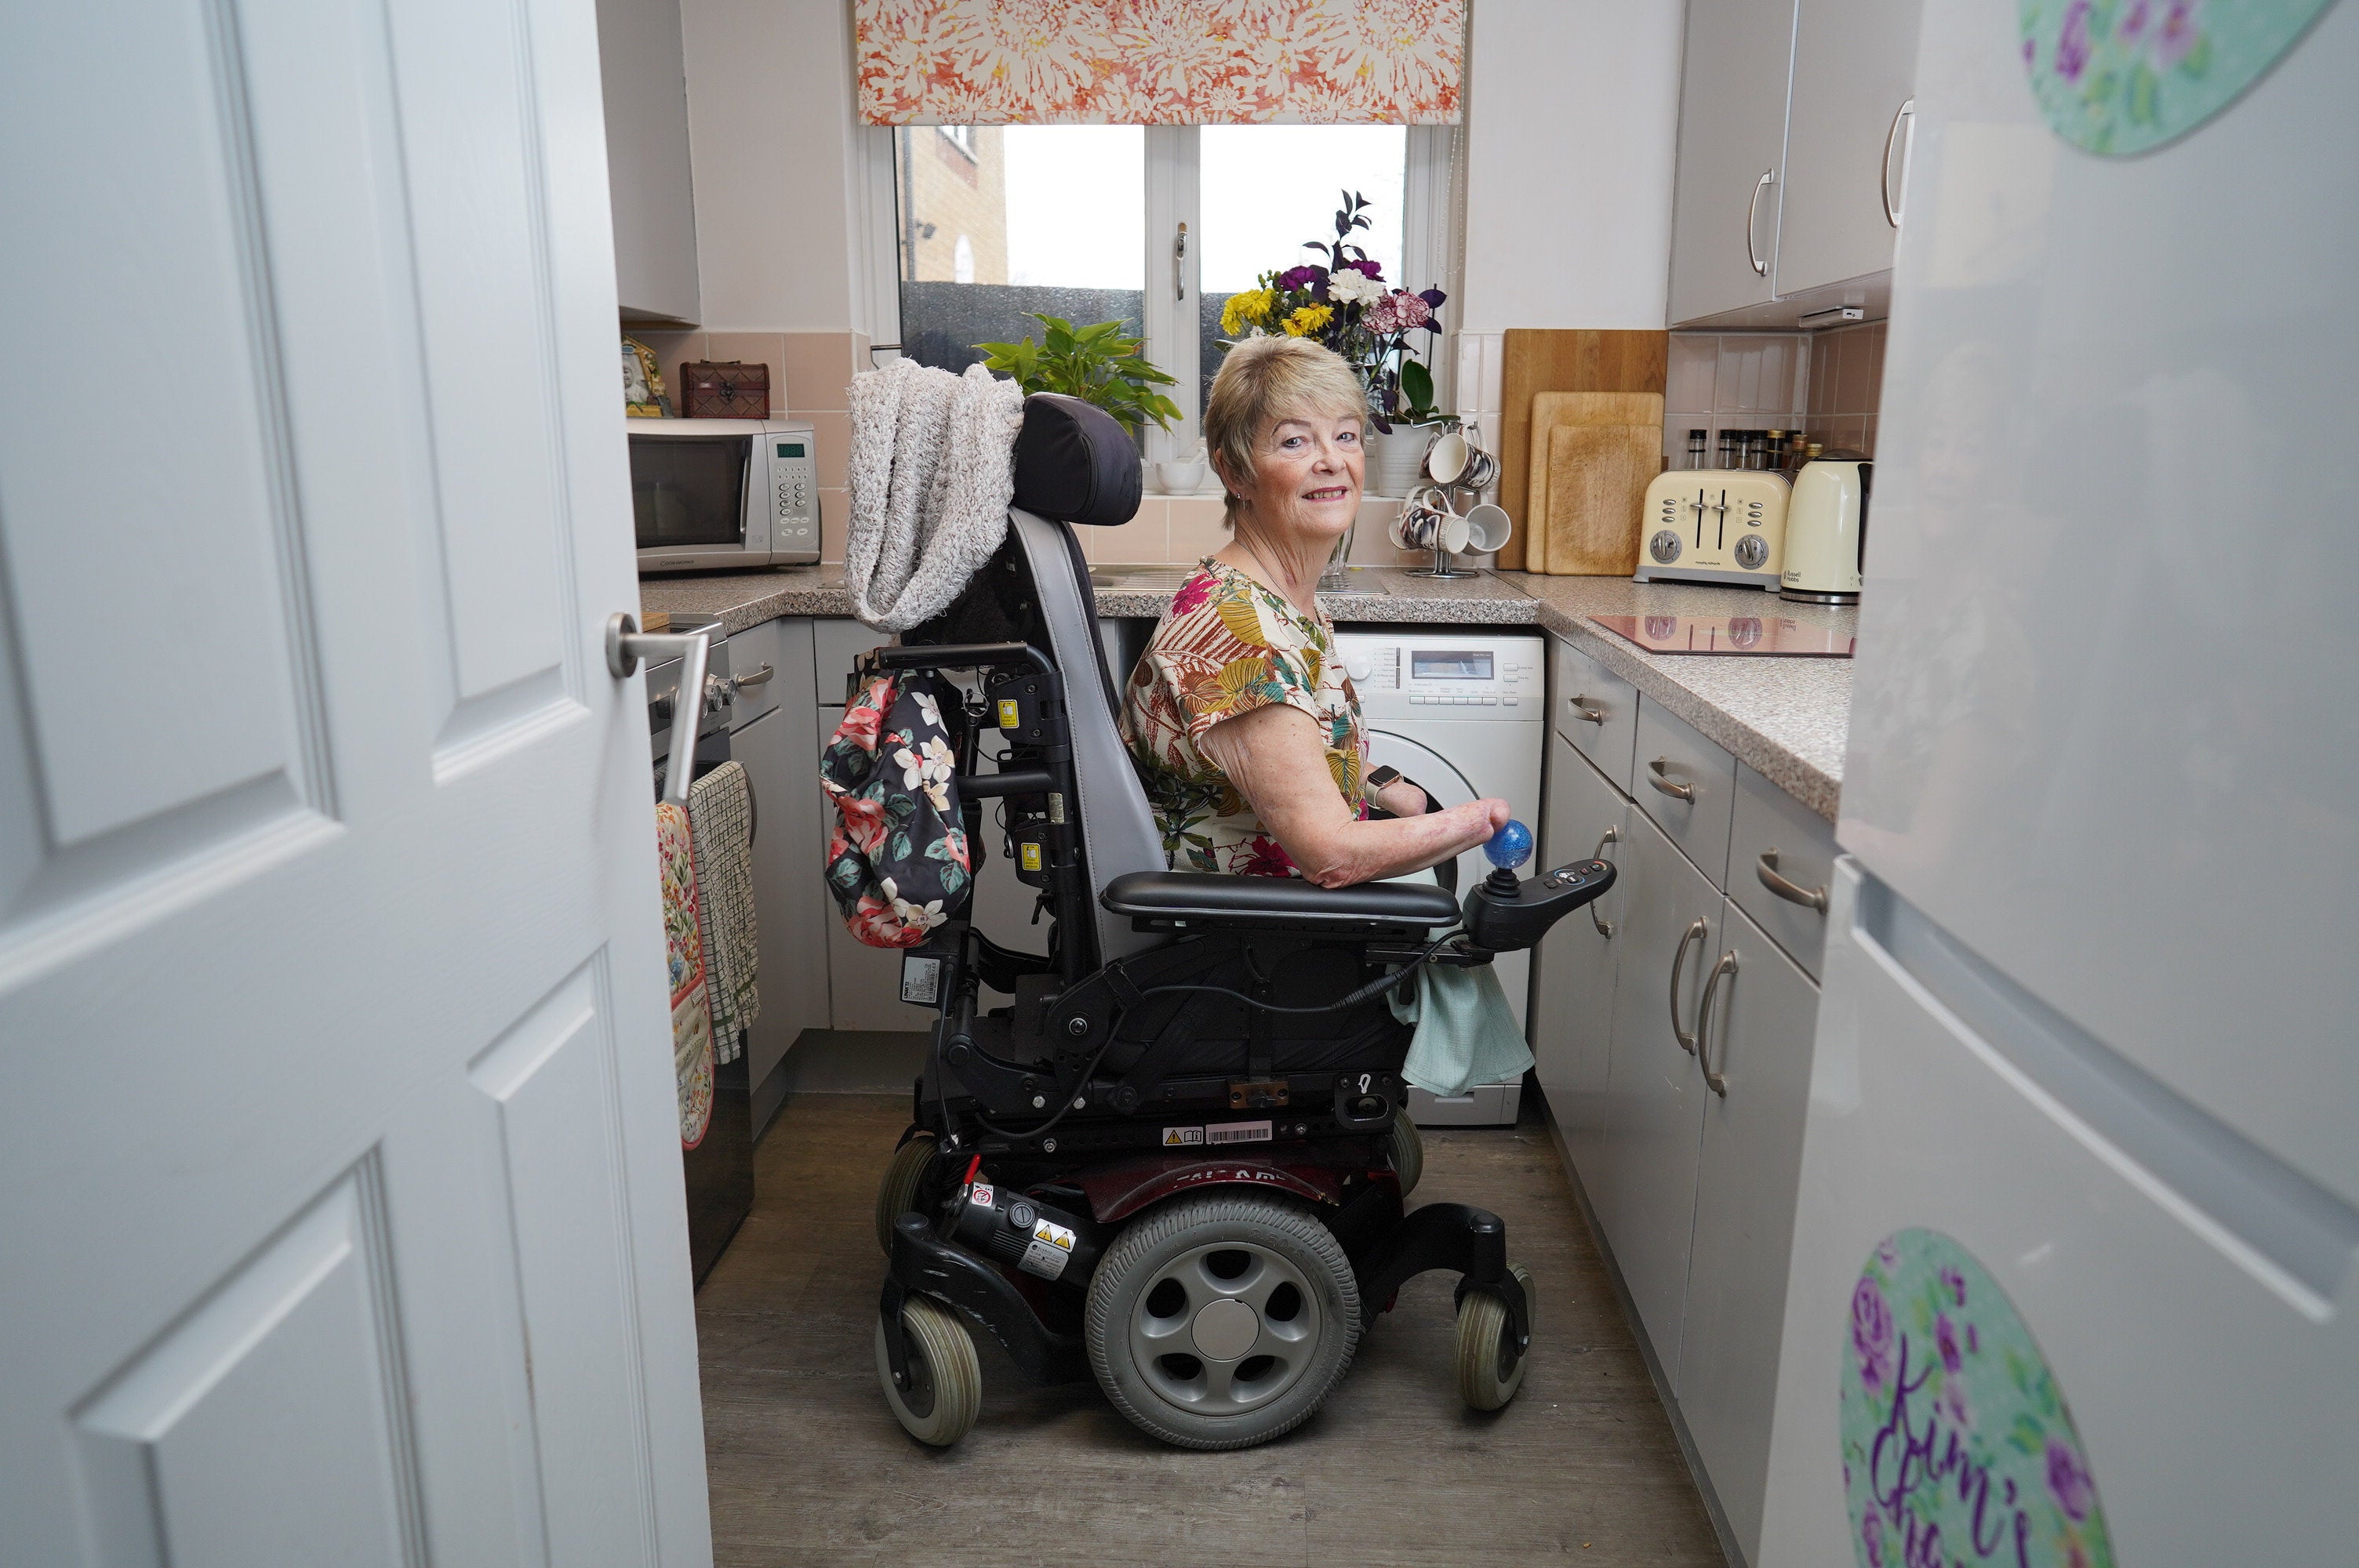 Ms Smith said her home is not suitable for a wheel-chair user